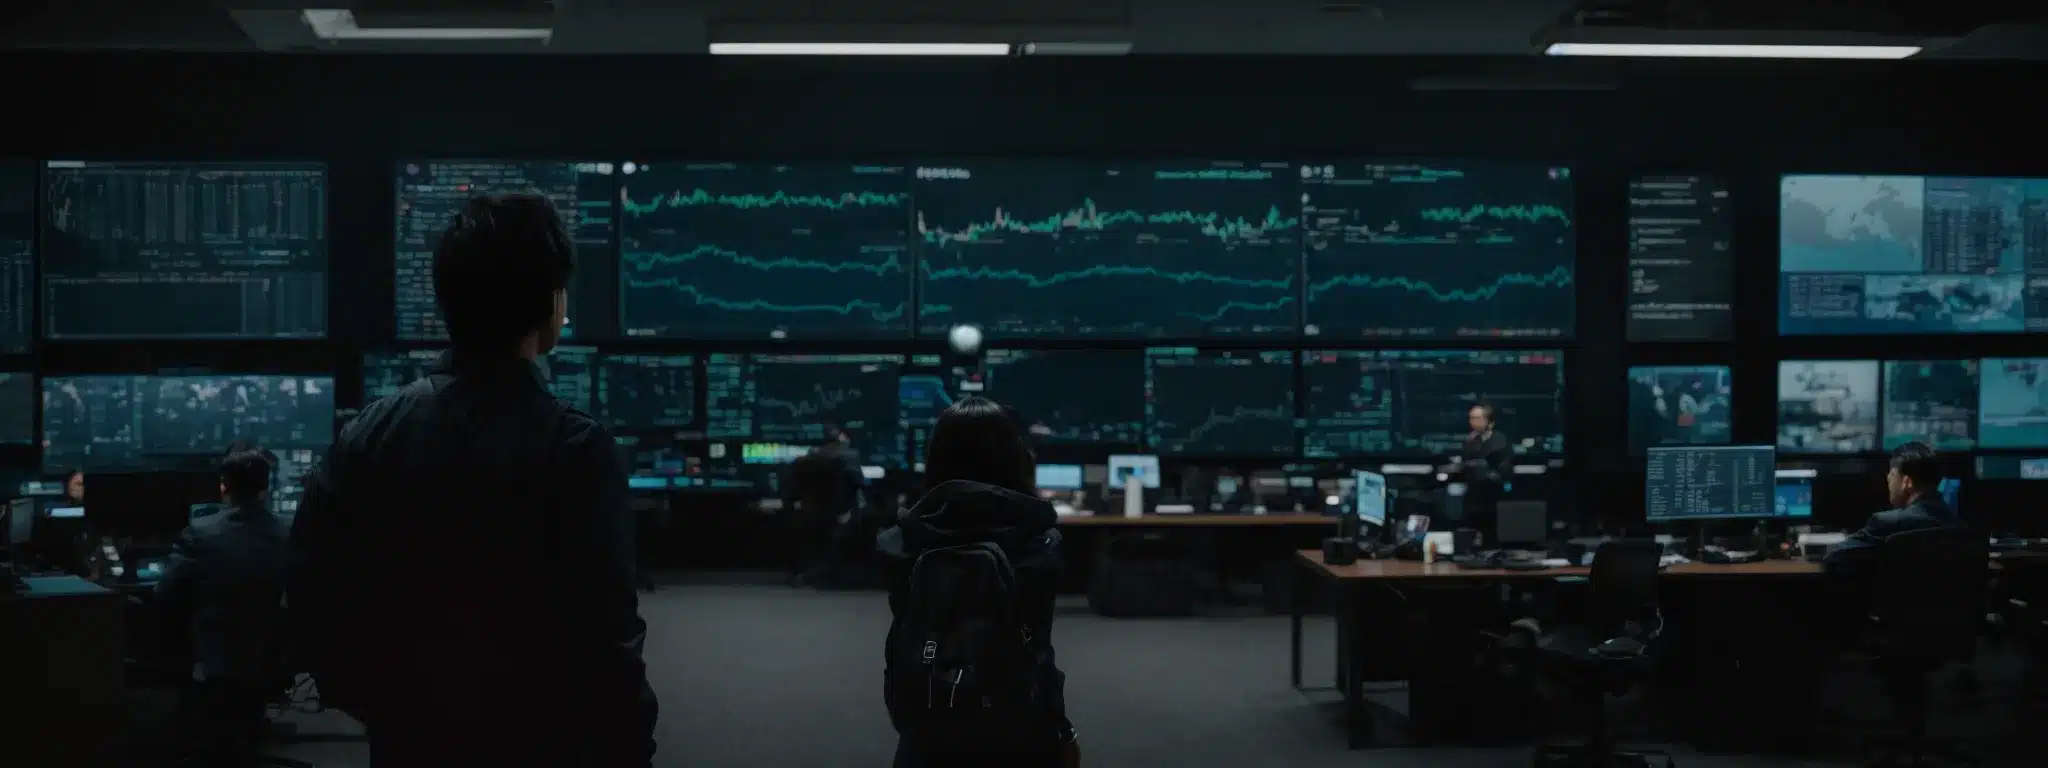 A Strategist Stands Before A Bustling Social Media Command Center, Monitoring Live Engagement Data On Large Screens.